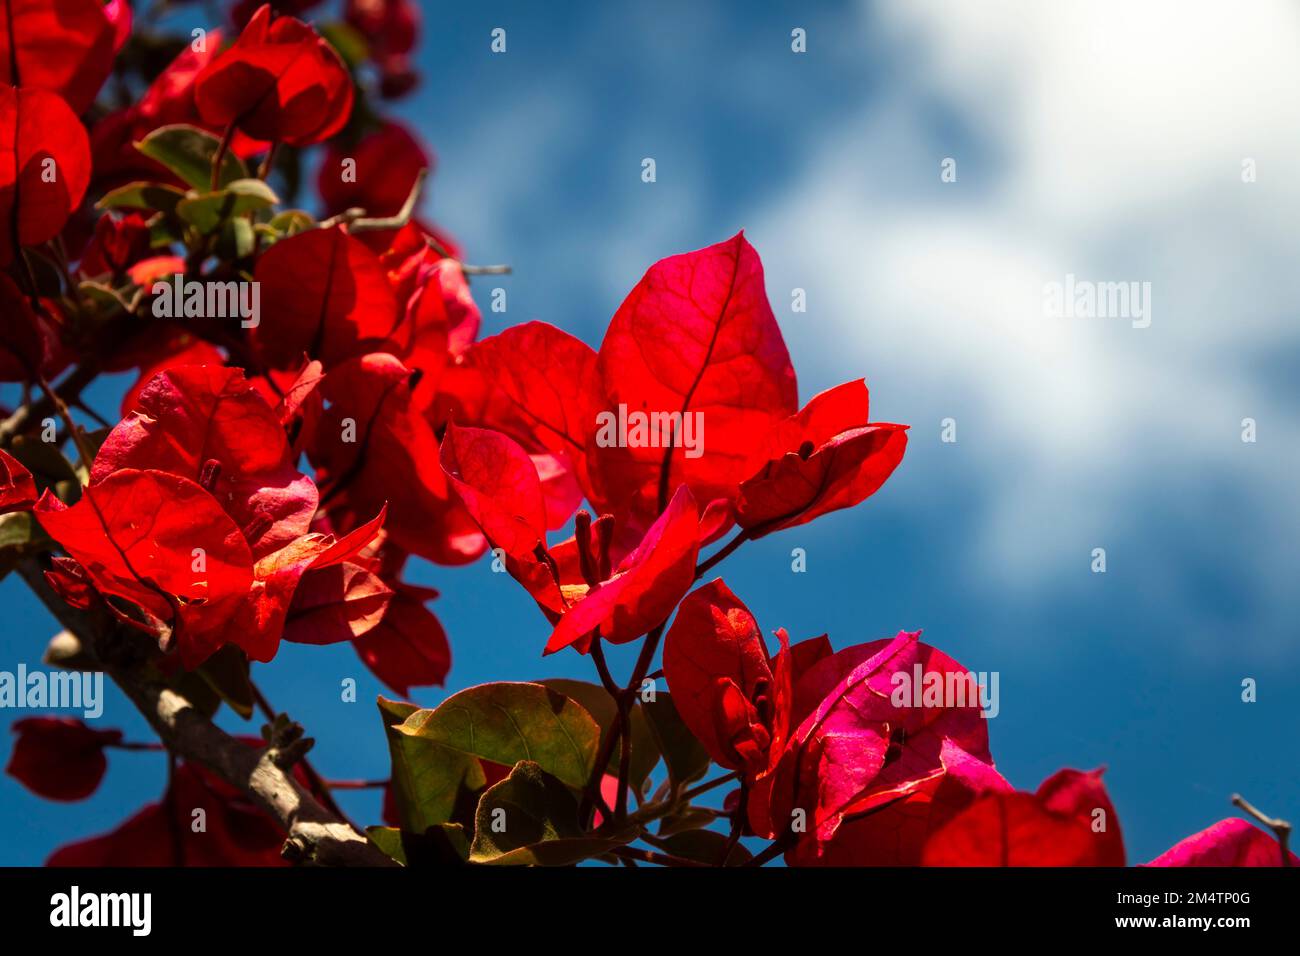 Red flowers with blue sky and white clouds, Wellington, North Island, New Zealand Stock Photo